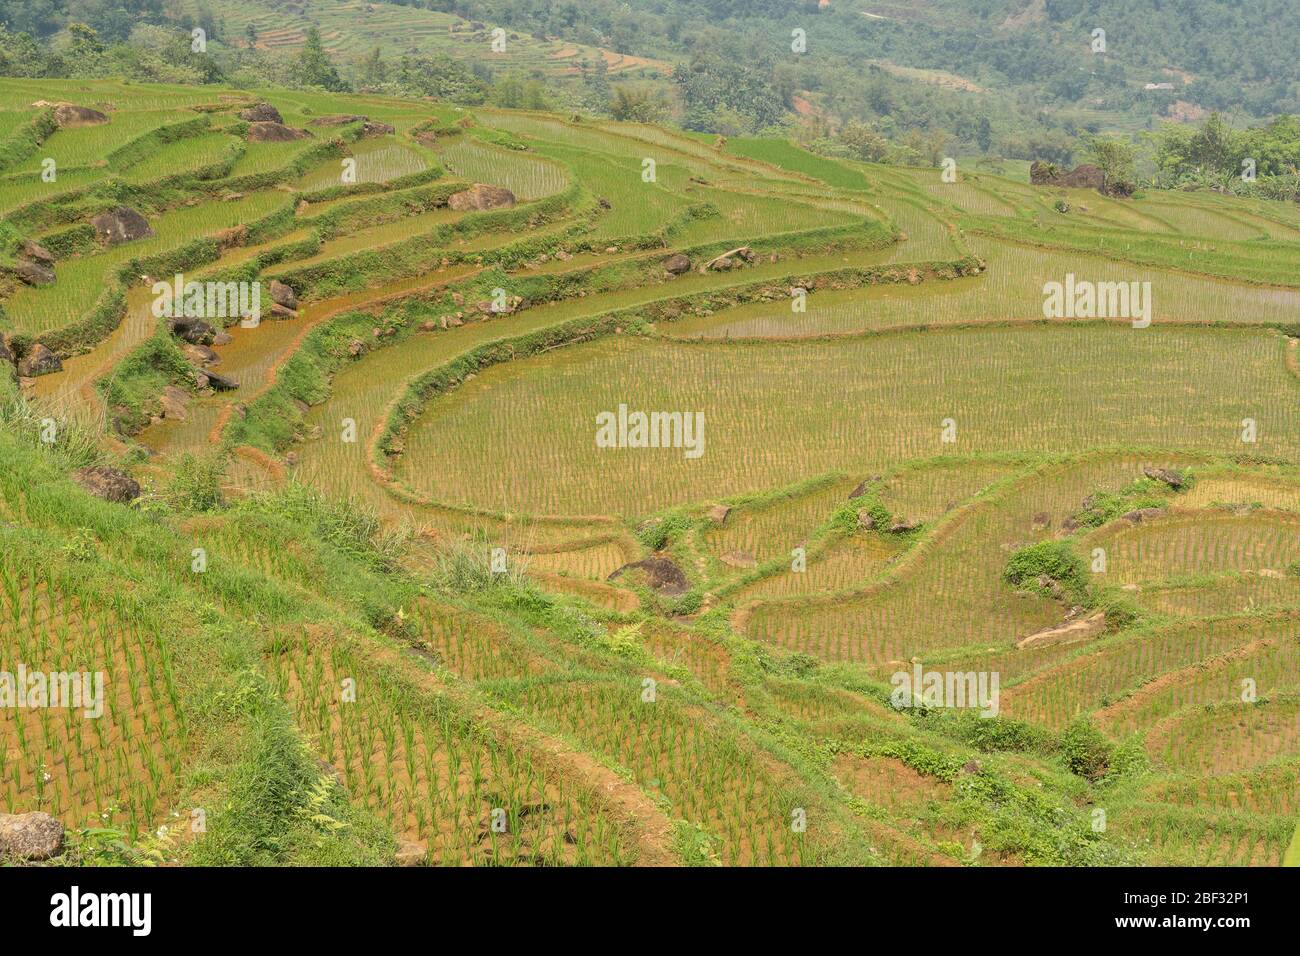 Newly planted rice terraces at Pu Luong Nature Reserve, Vietnam Stock Photo